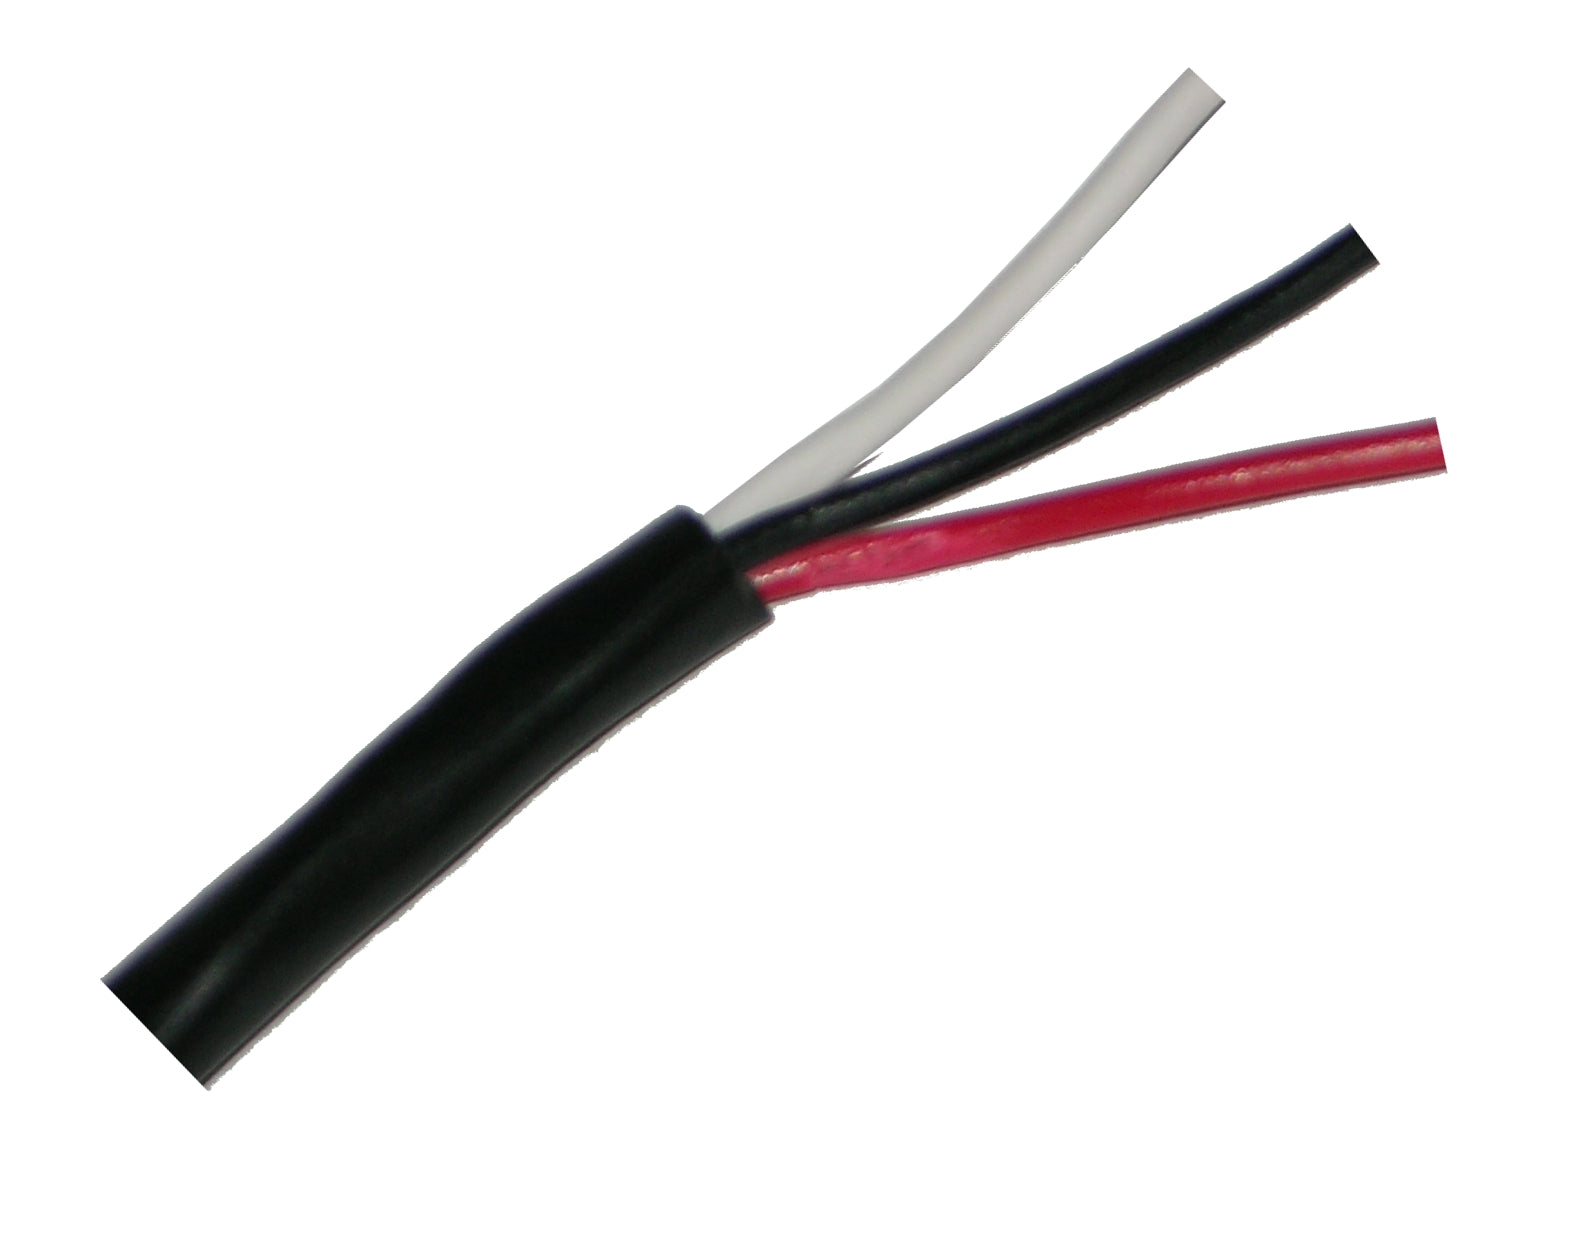 JSC, JSC 5932, Antenna Rotator Wire, 20AWG / 3 Conductor, sold by the foot or 1000' box